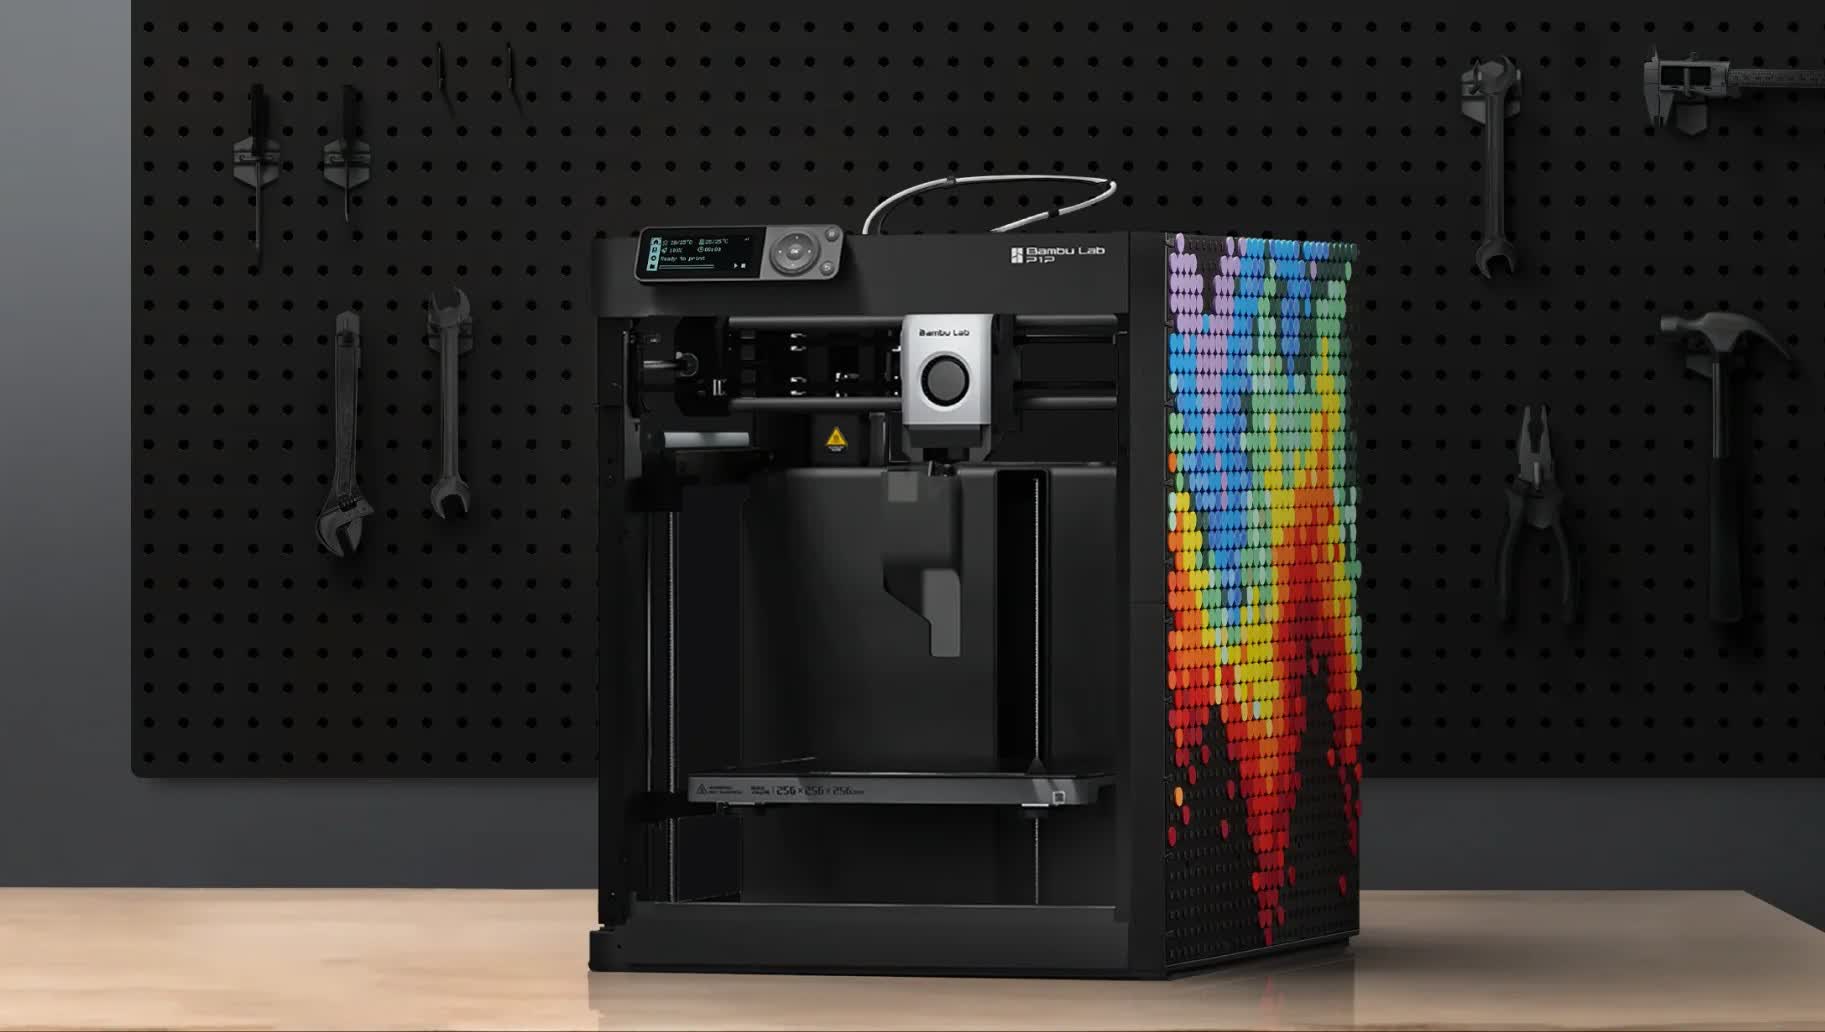 Cloud glitch causes 3D printers to start on their own, spooking owners